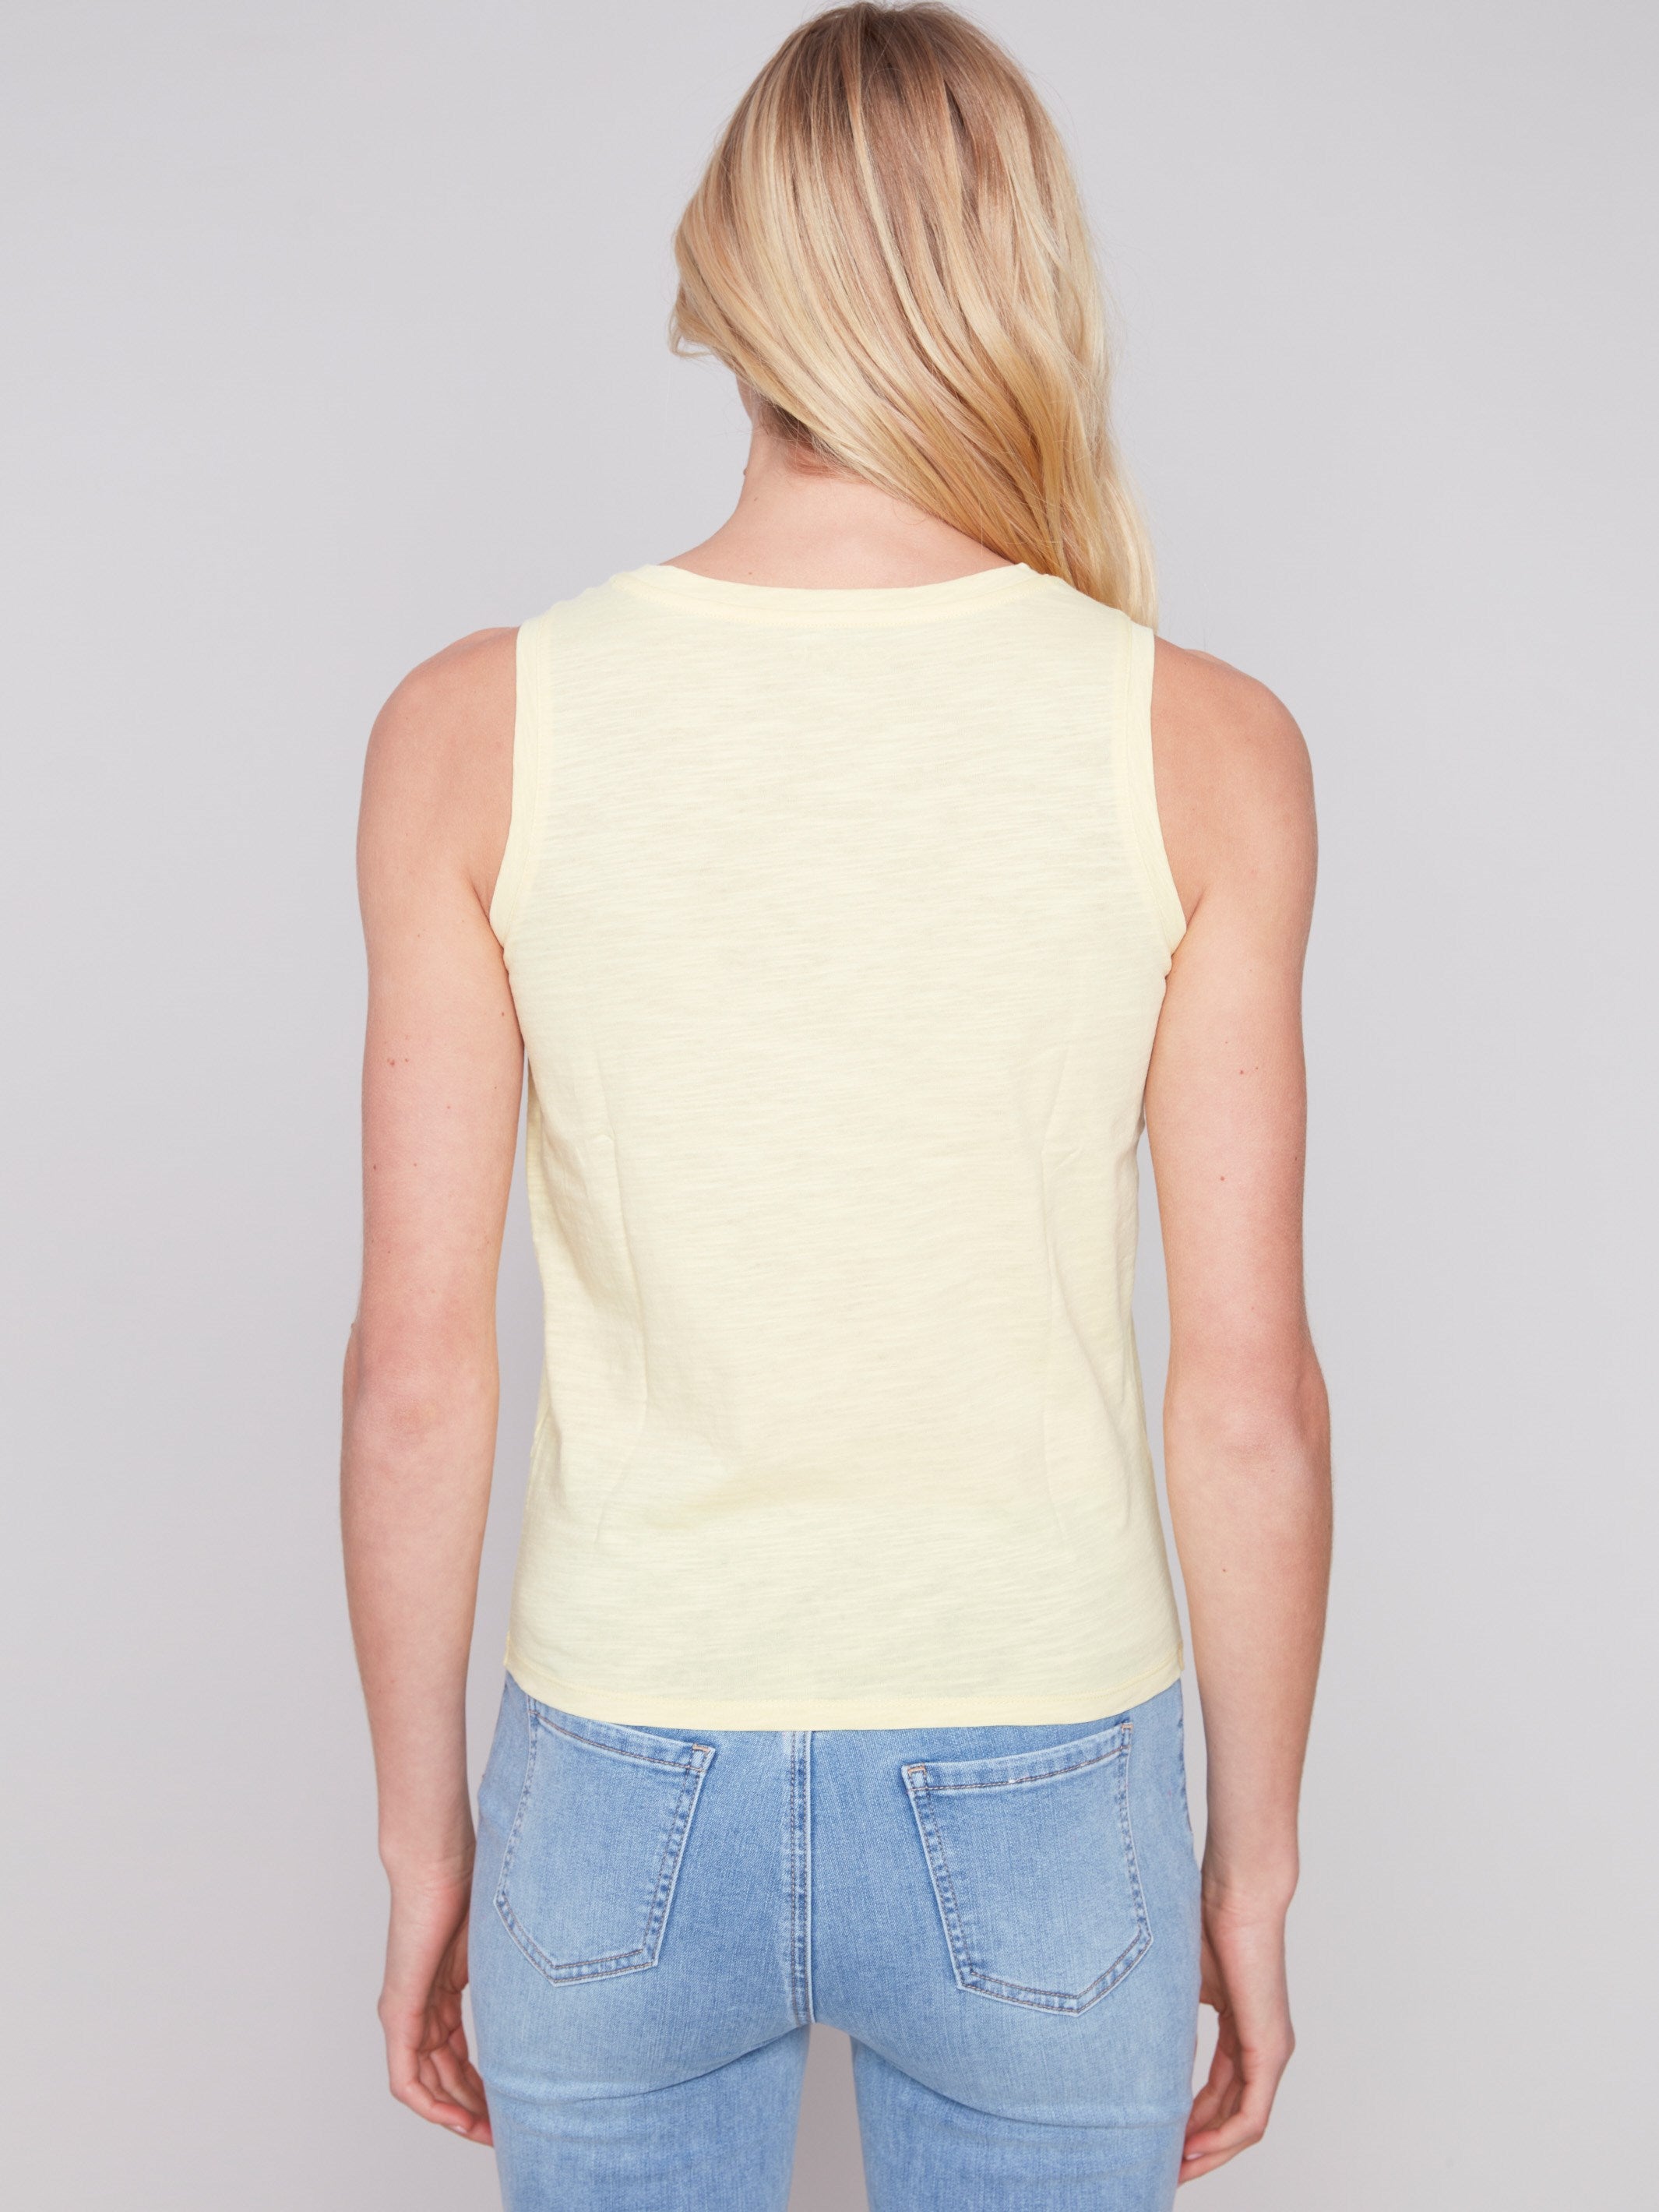 Organic Cotton Tank Top With Knot Detail - Lemon - Charlie B Collection Canada - Image 2